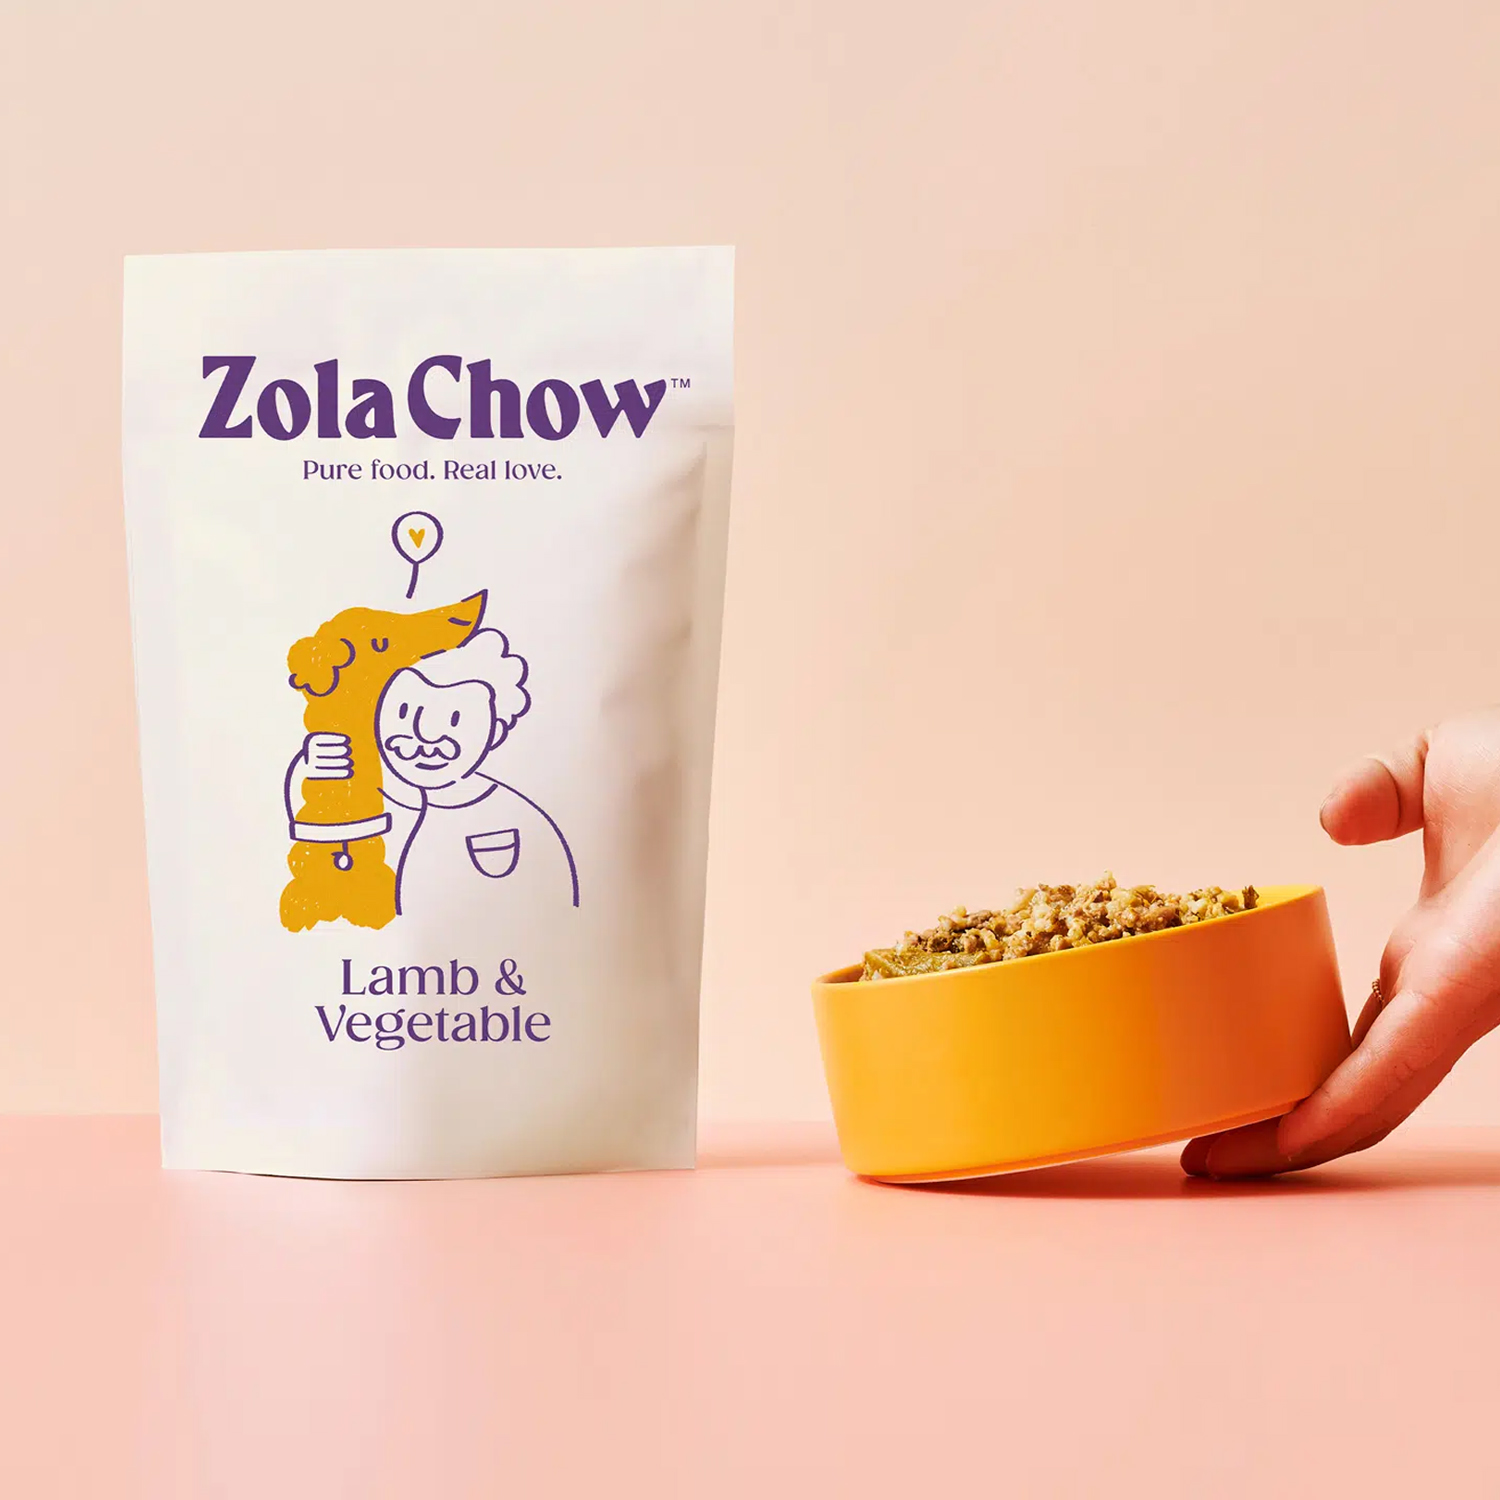 Zola Chow custom illustration packaging with pet food bowl.